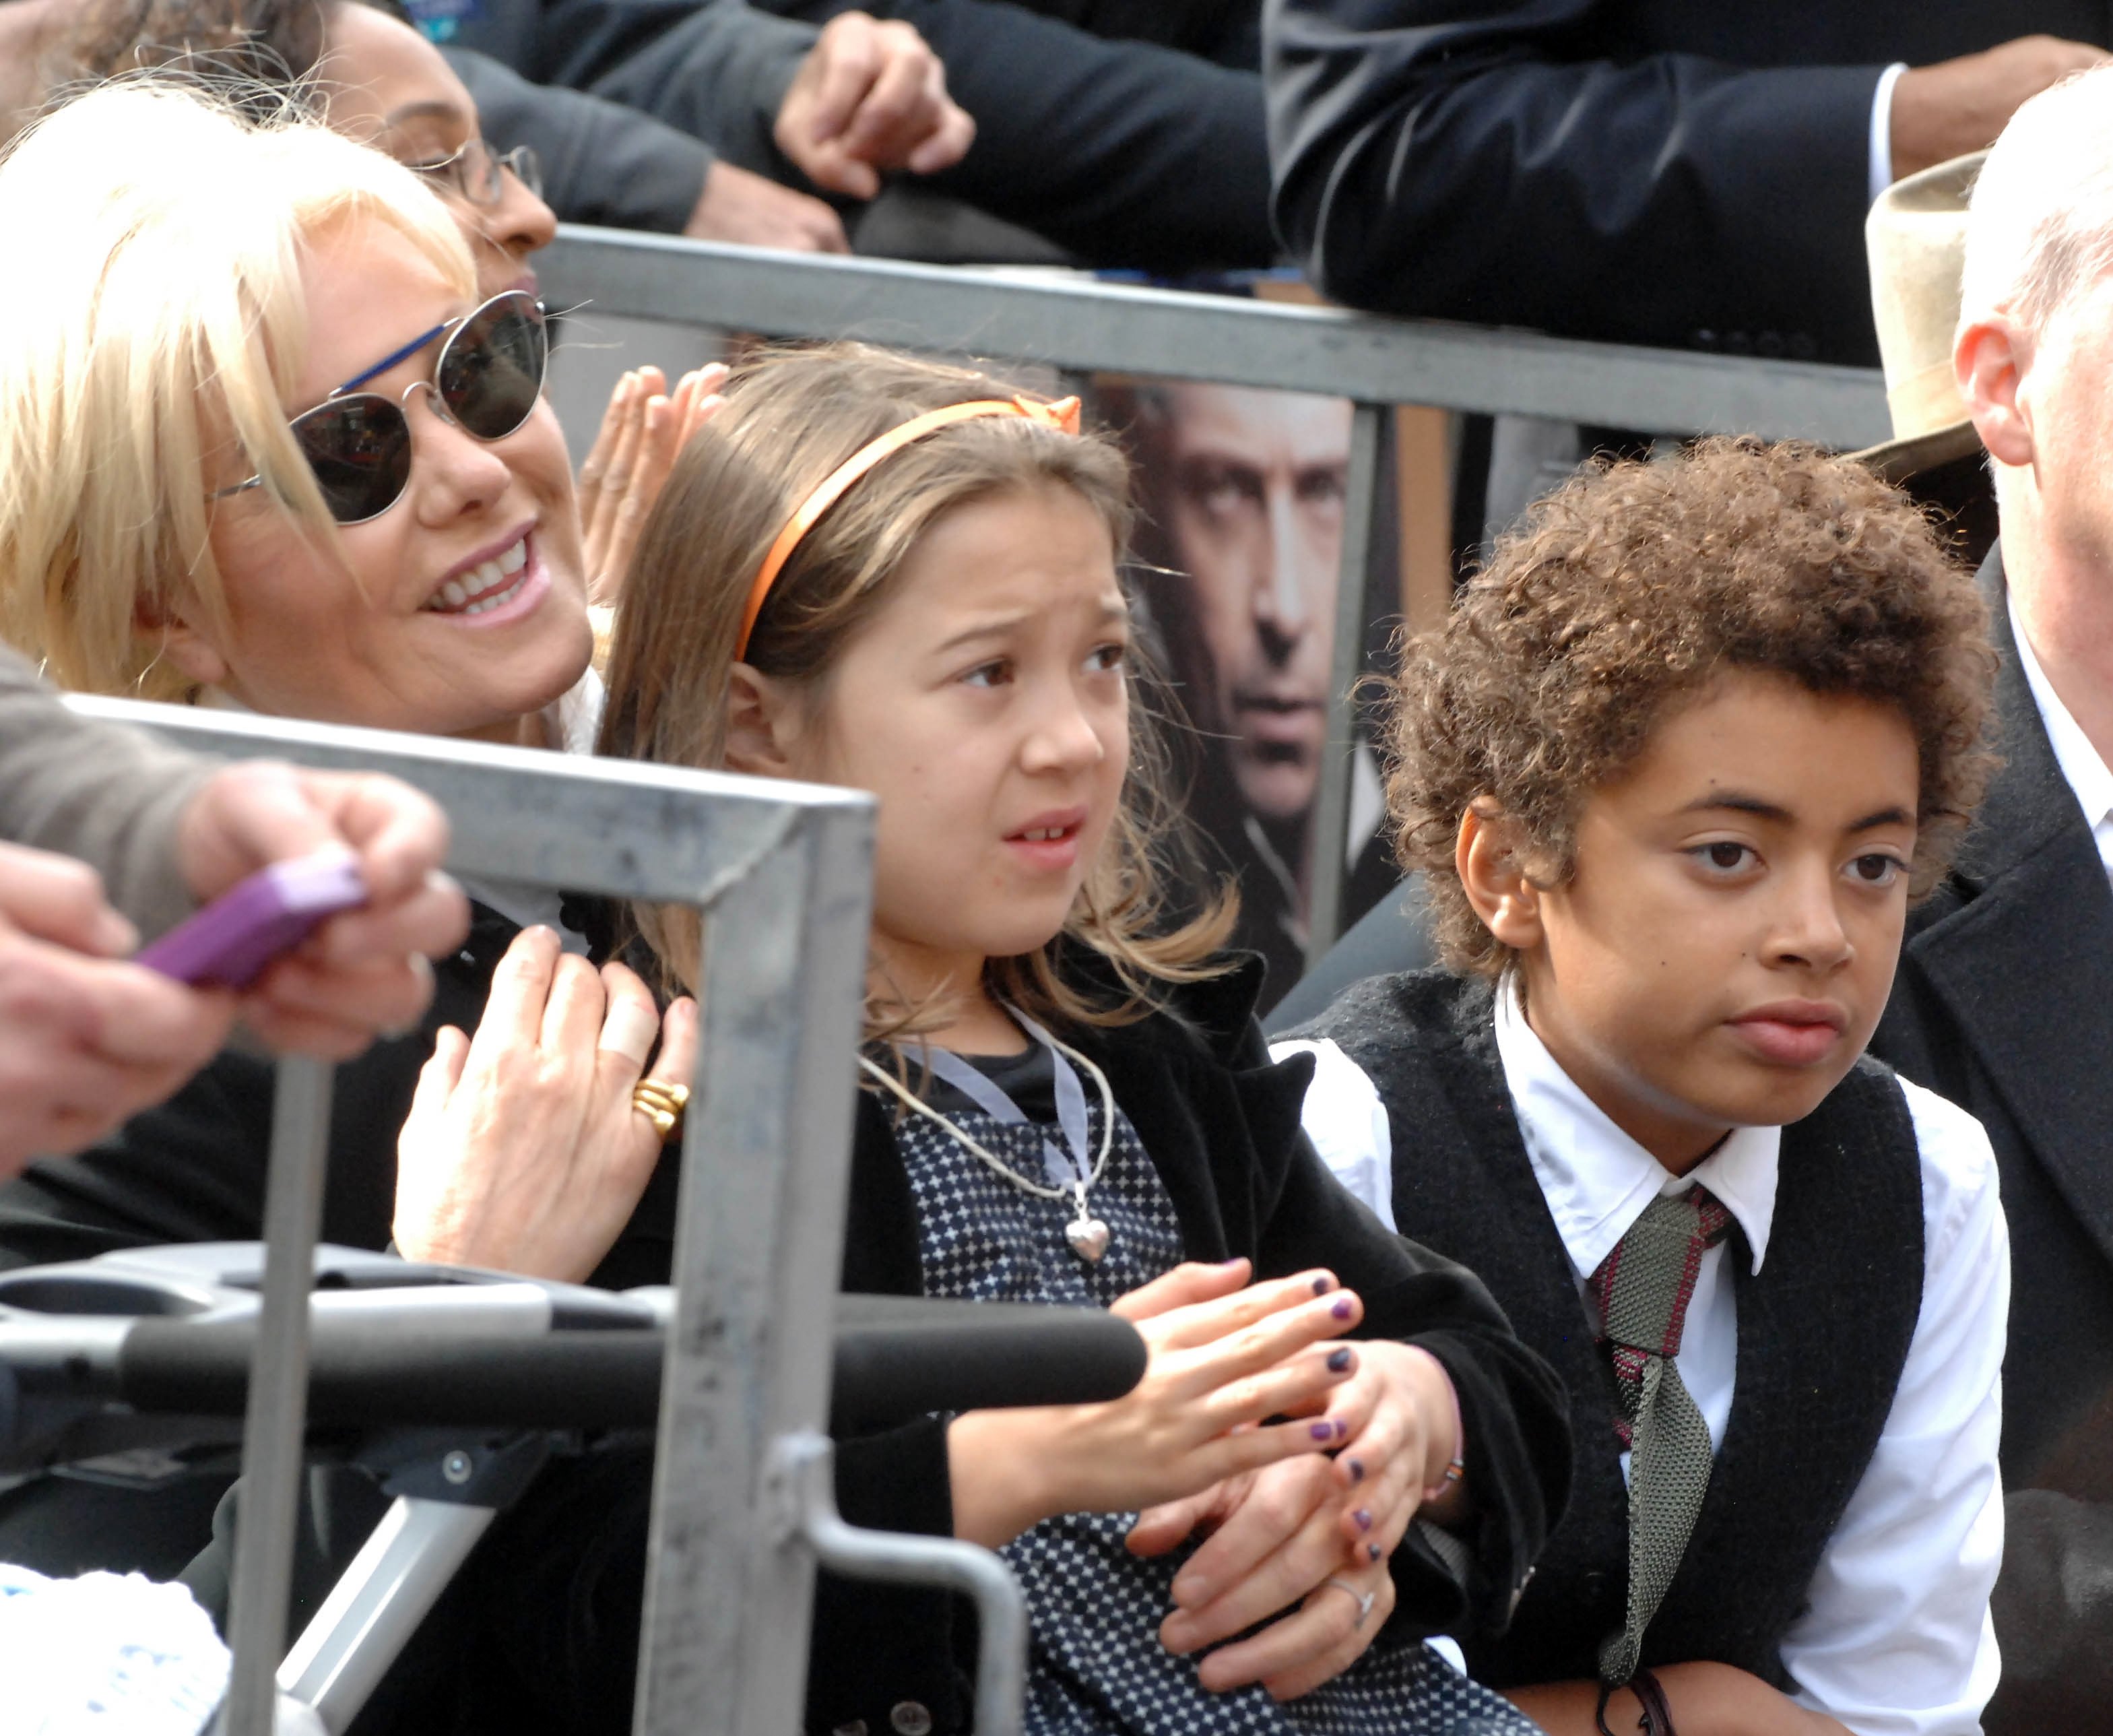 Actress Deborra-Lee Furness and children Ava and Oscar participate in the Hugh Jackman Star ceremony at The Hollywood Walk Of Fame on December 13, 2012 in Hollywood, California | Source: Getty Images